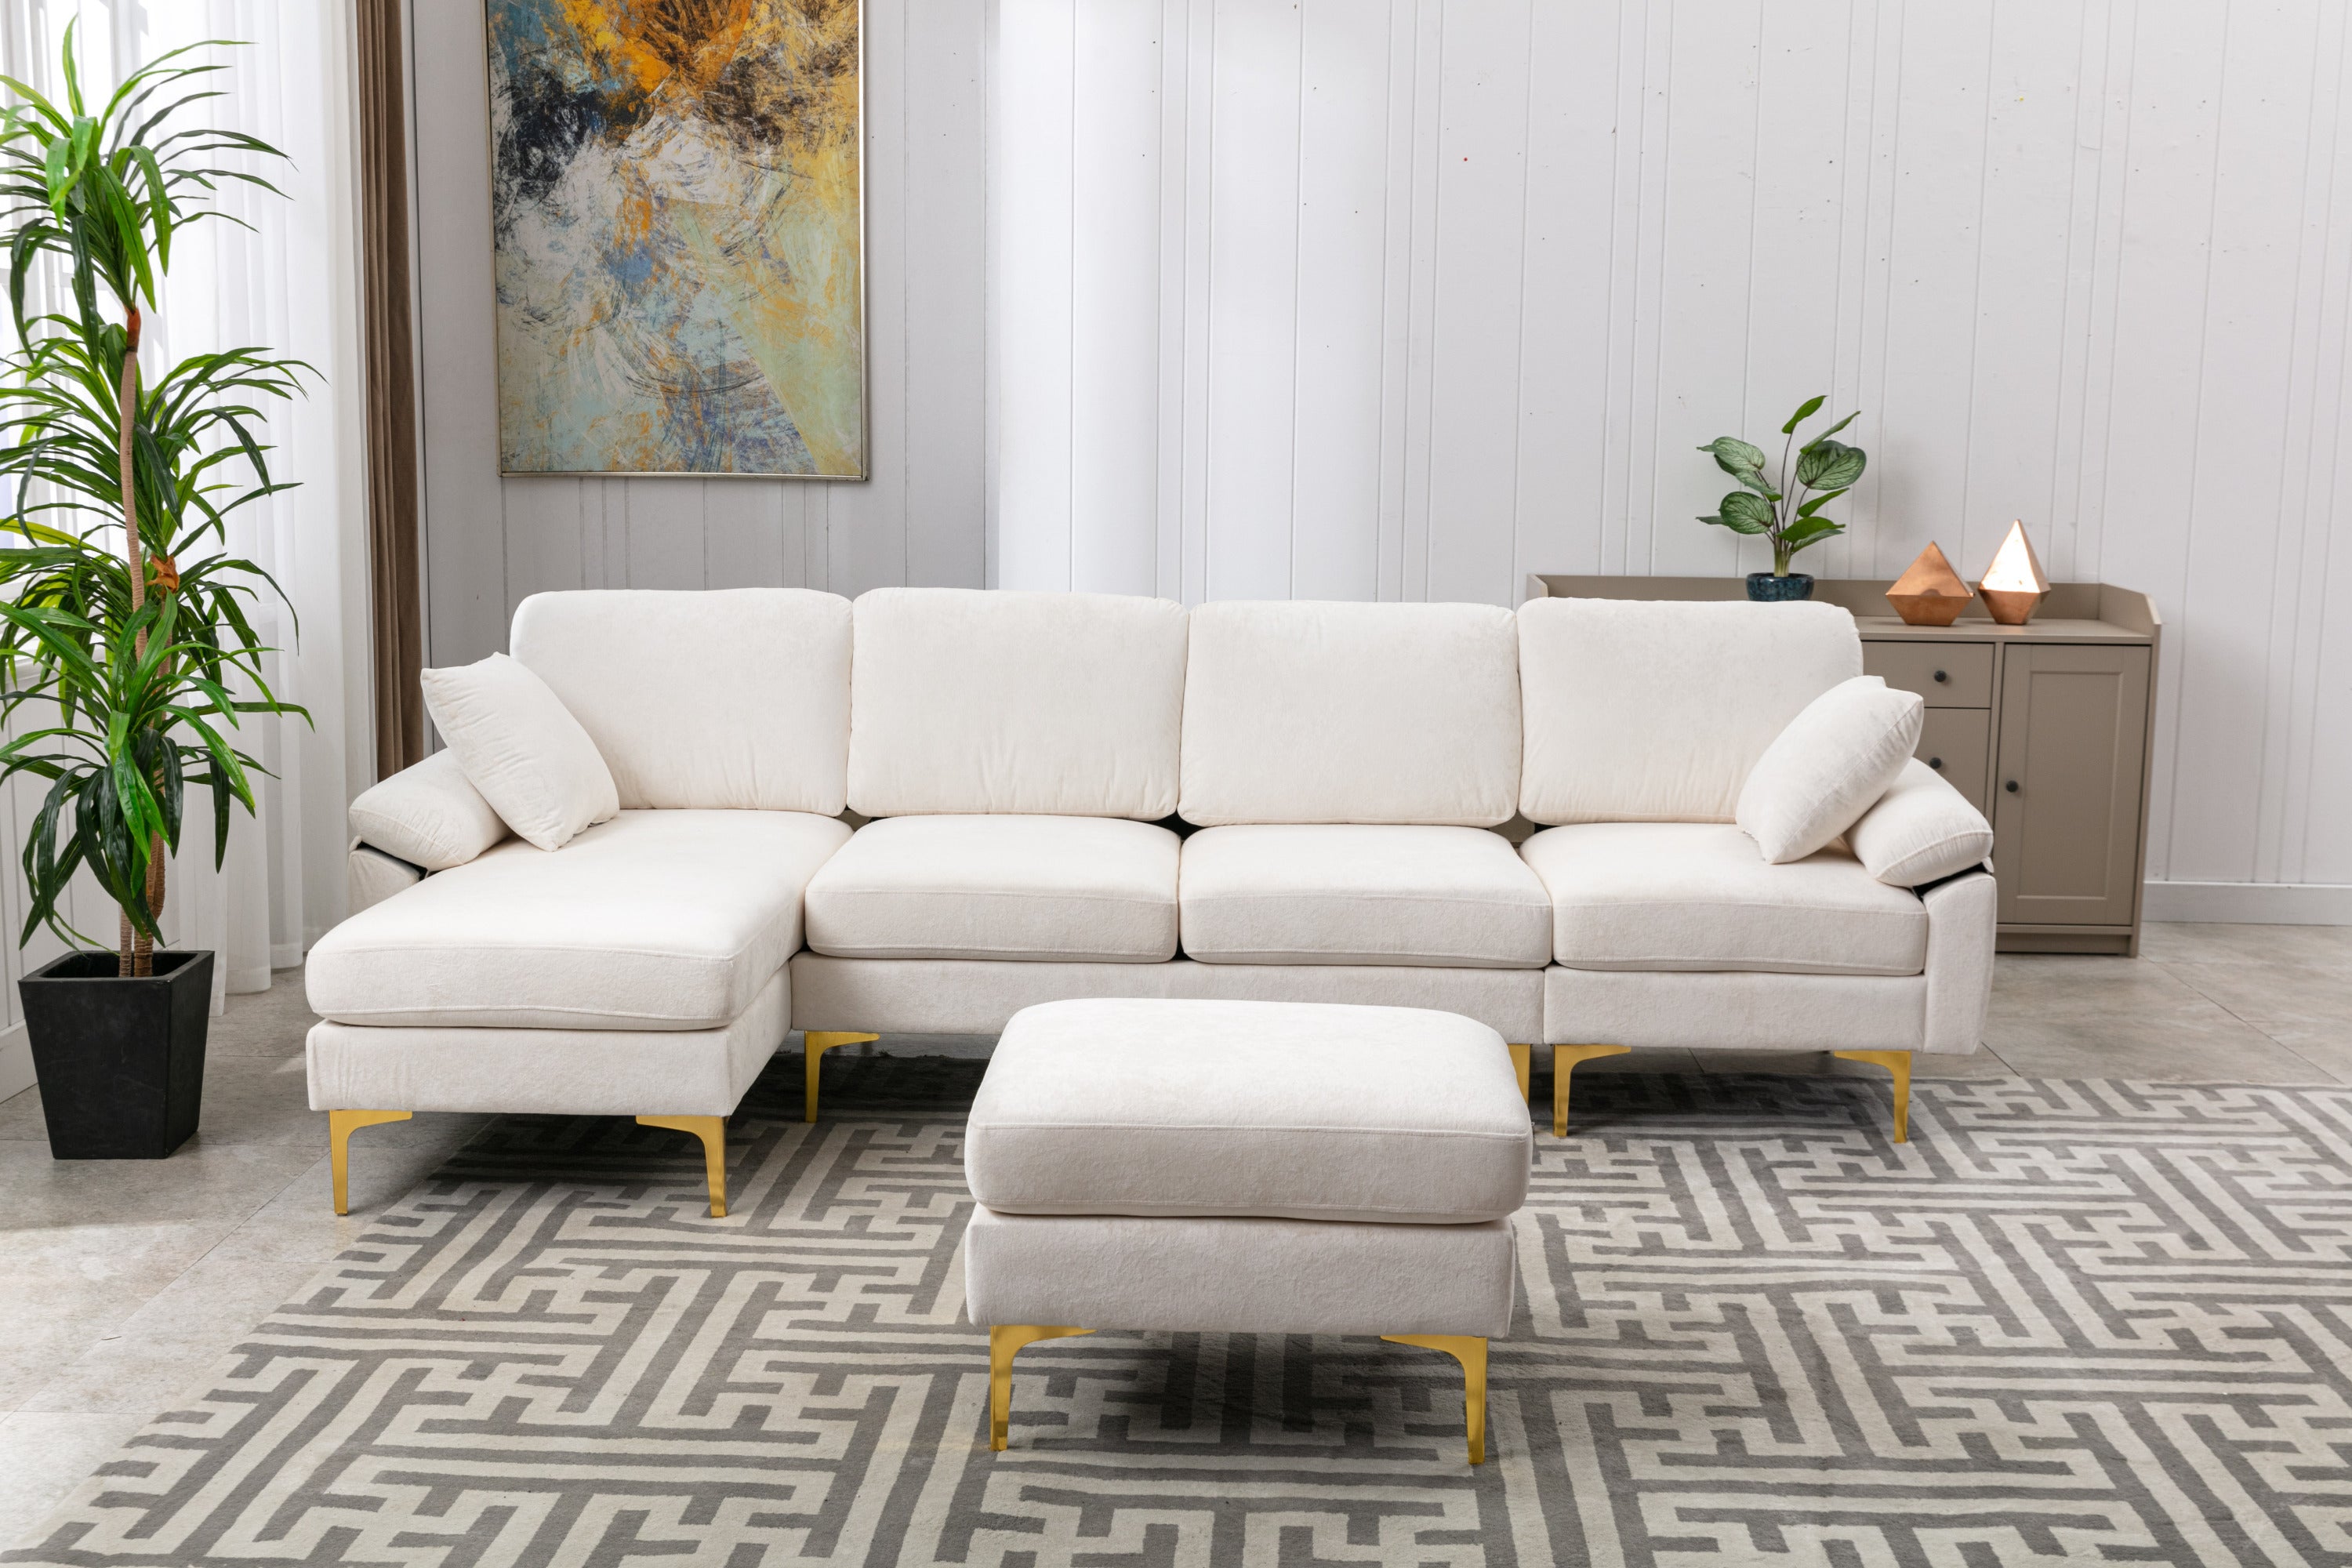 🆓🚛 114" Convertible L-Shaped Sectional Sofa with Movable Ottoman, Upholstered Accent Sofa with 2 Pillows and Golden Metal Legs, White